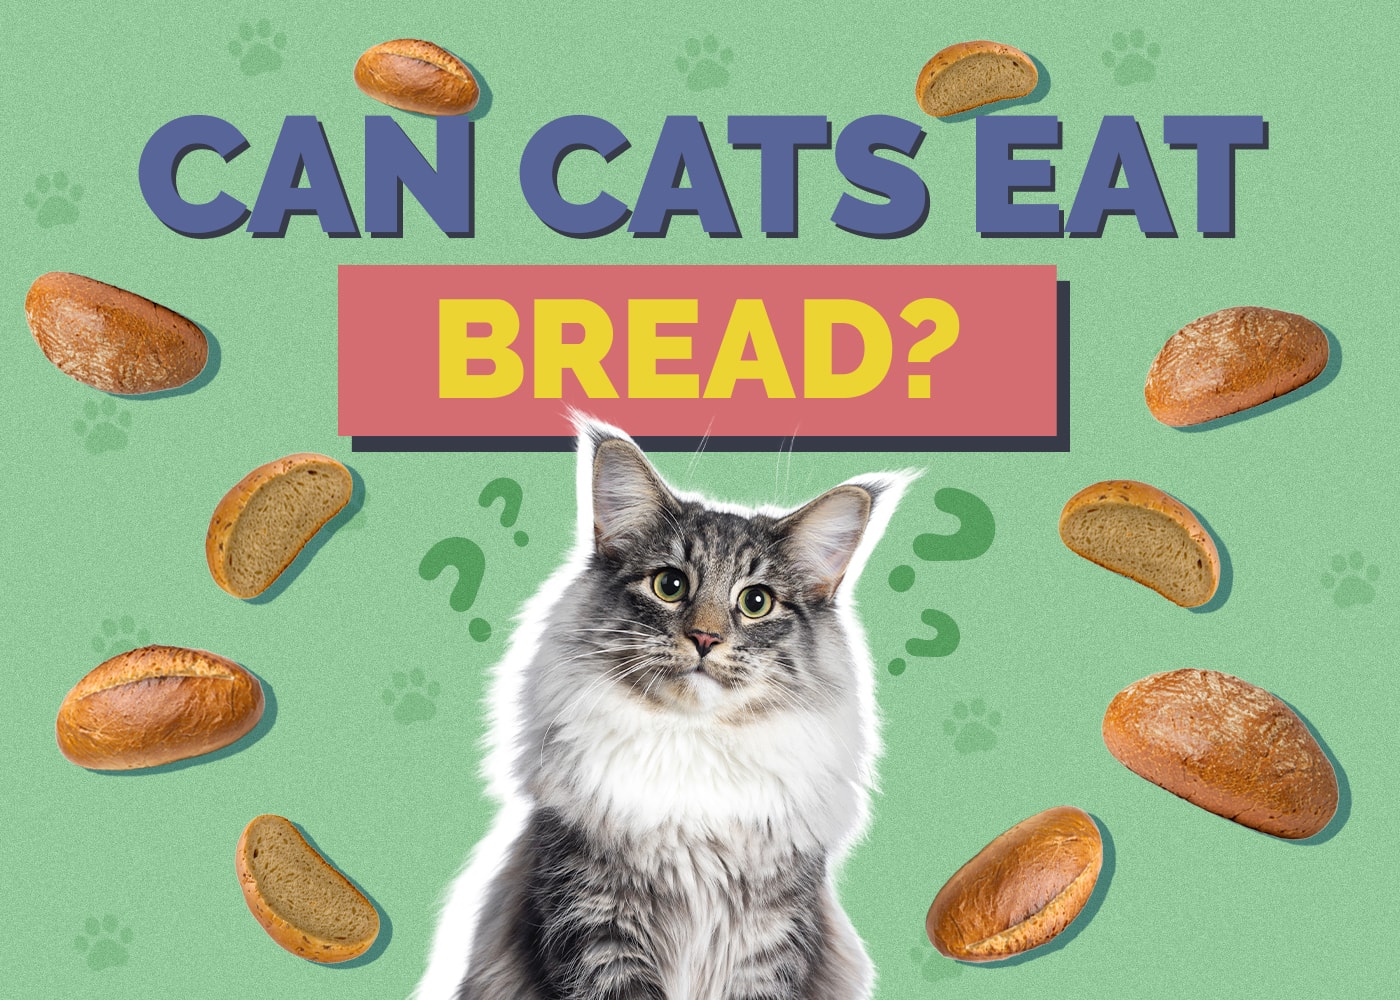 Can Cats Eat bread